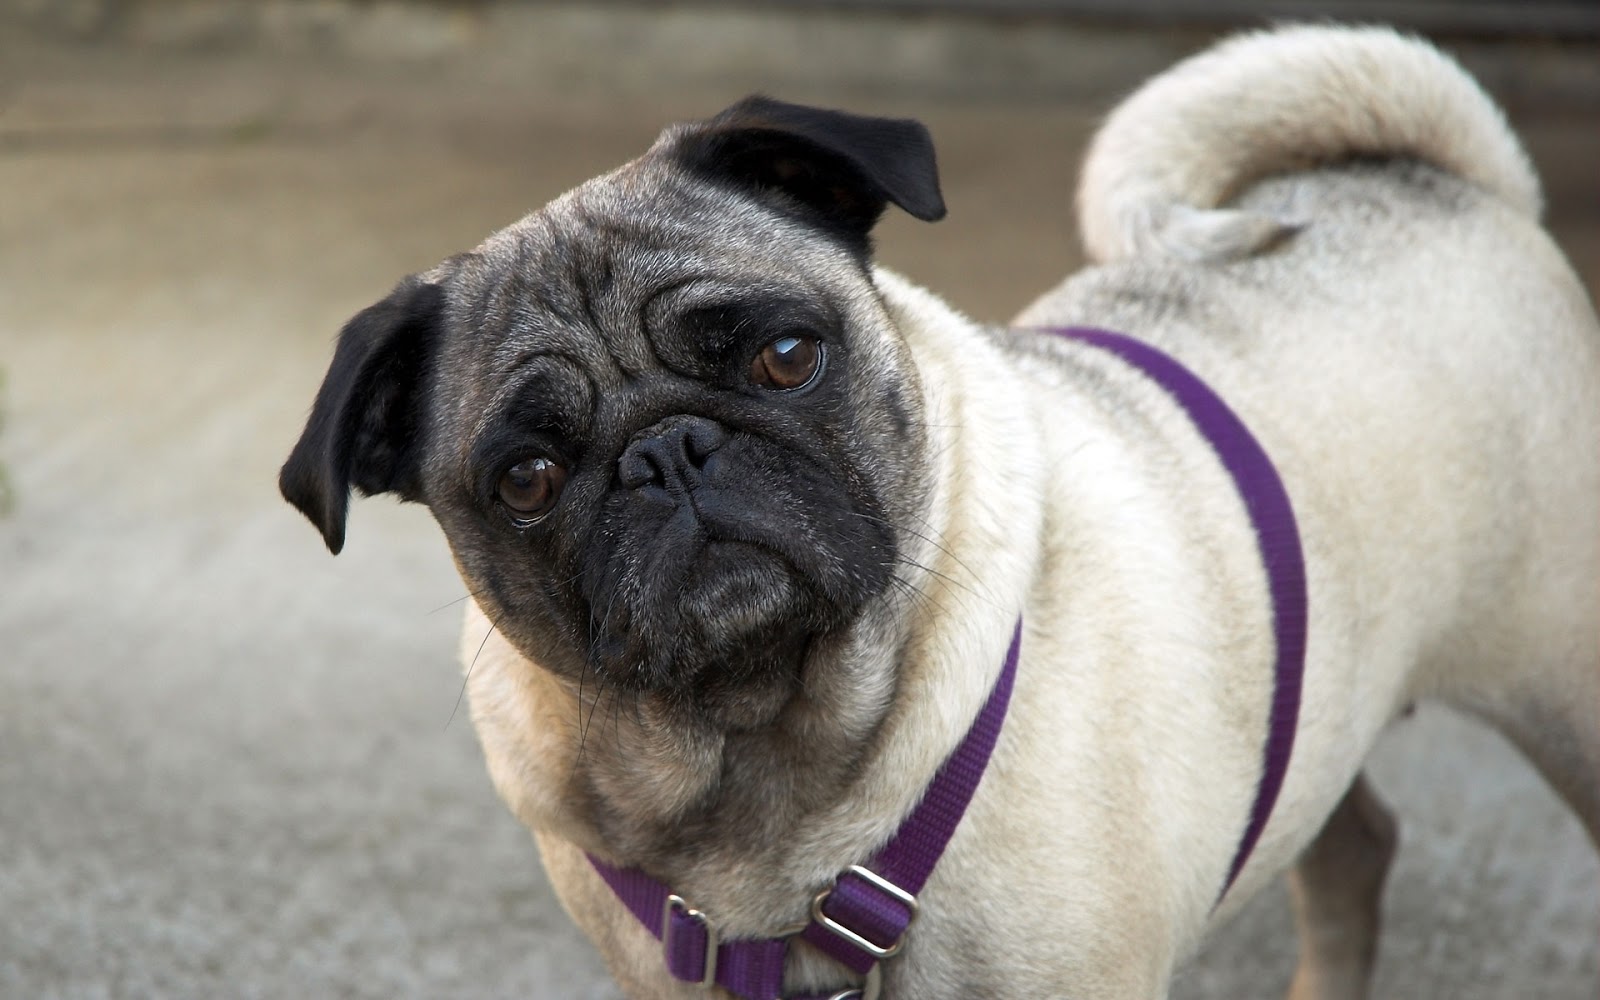 Pug Dog Best HD Wallpapers 2013 ~ All About HD Wallpapers